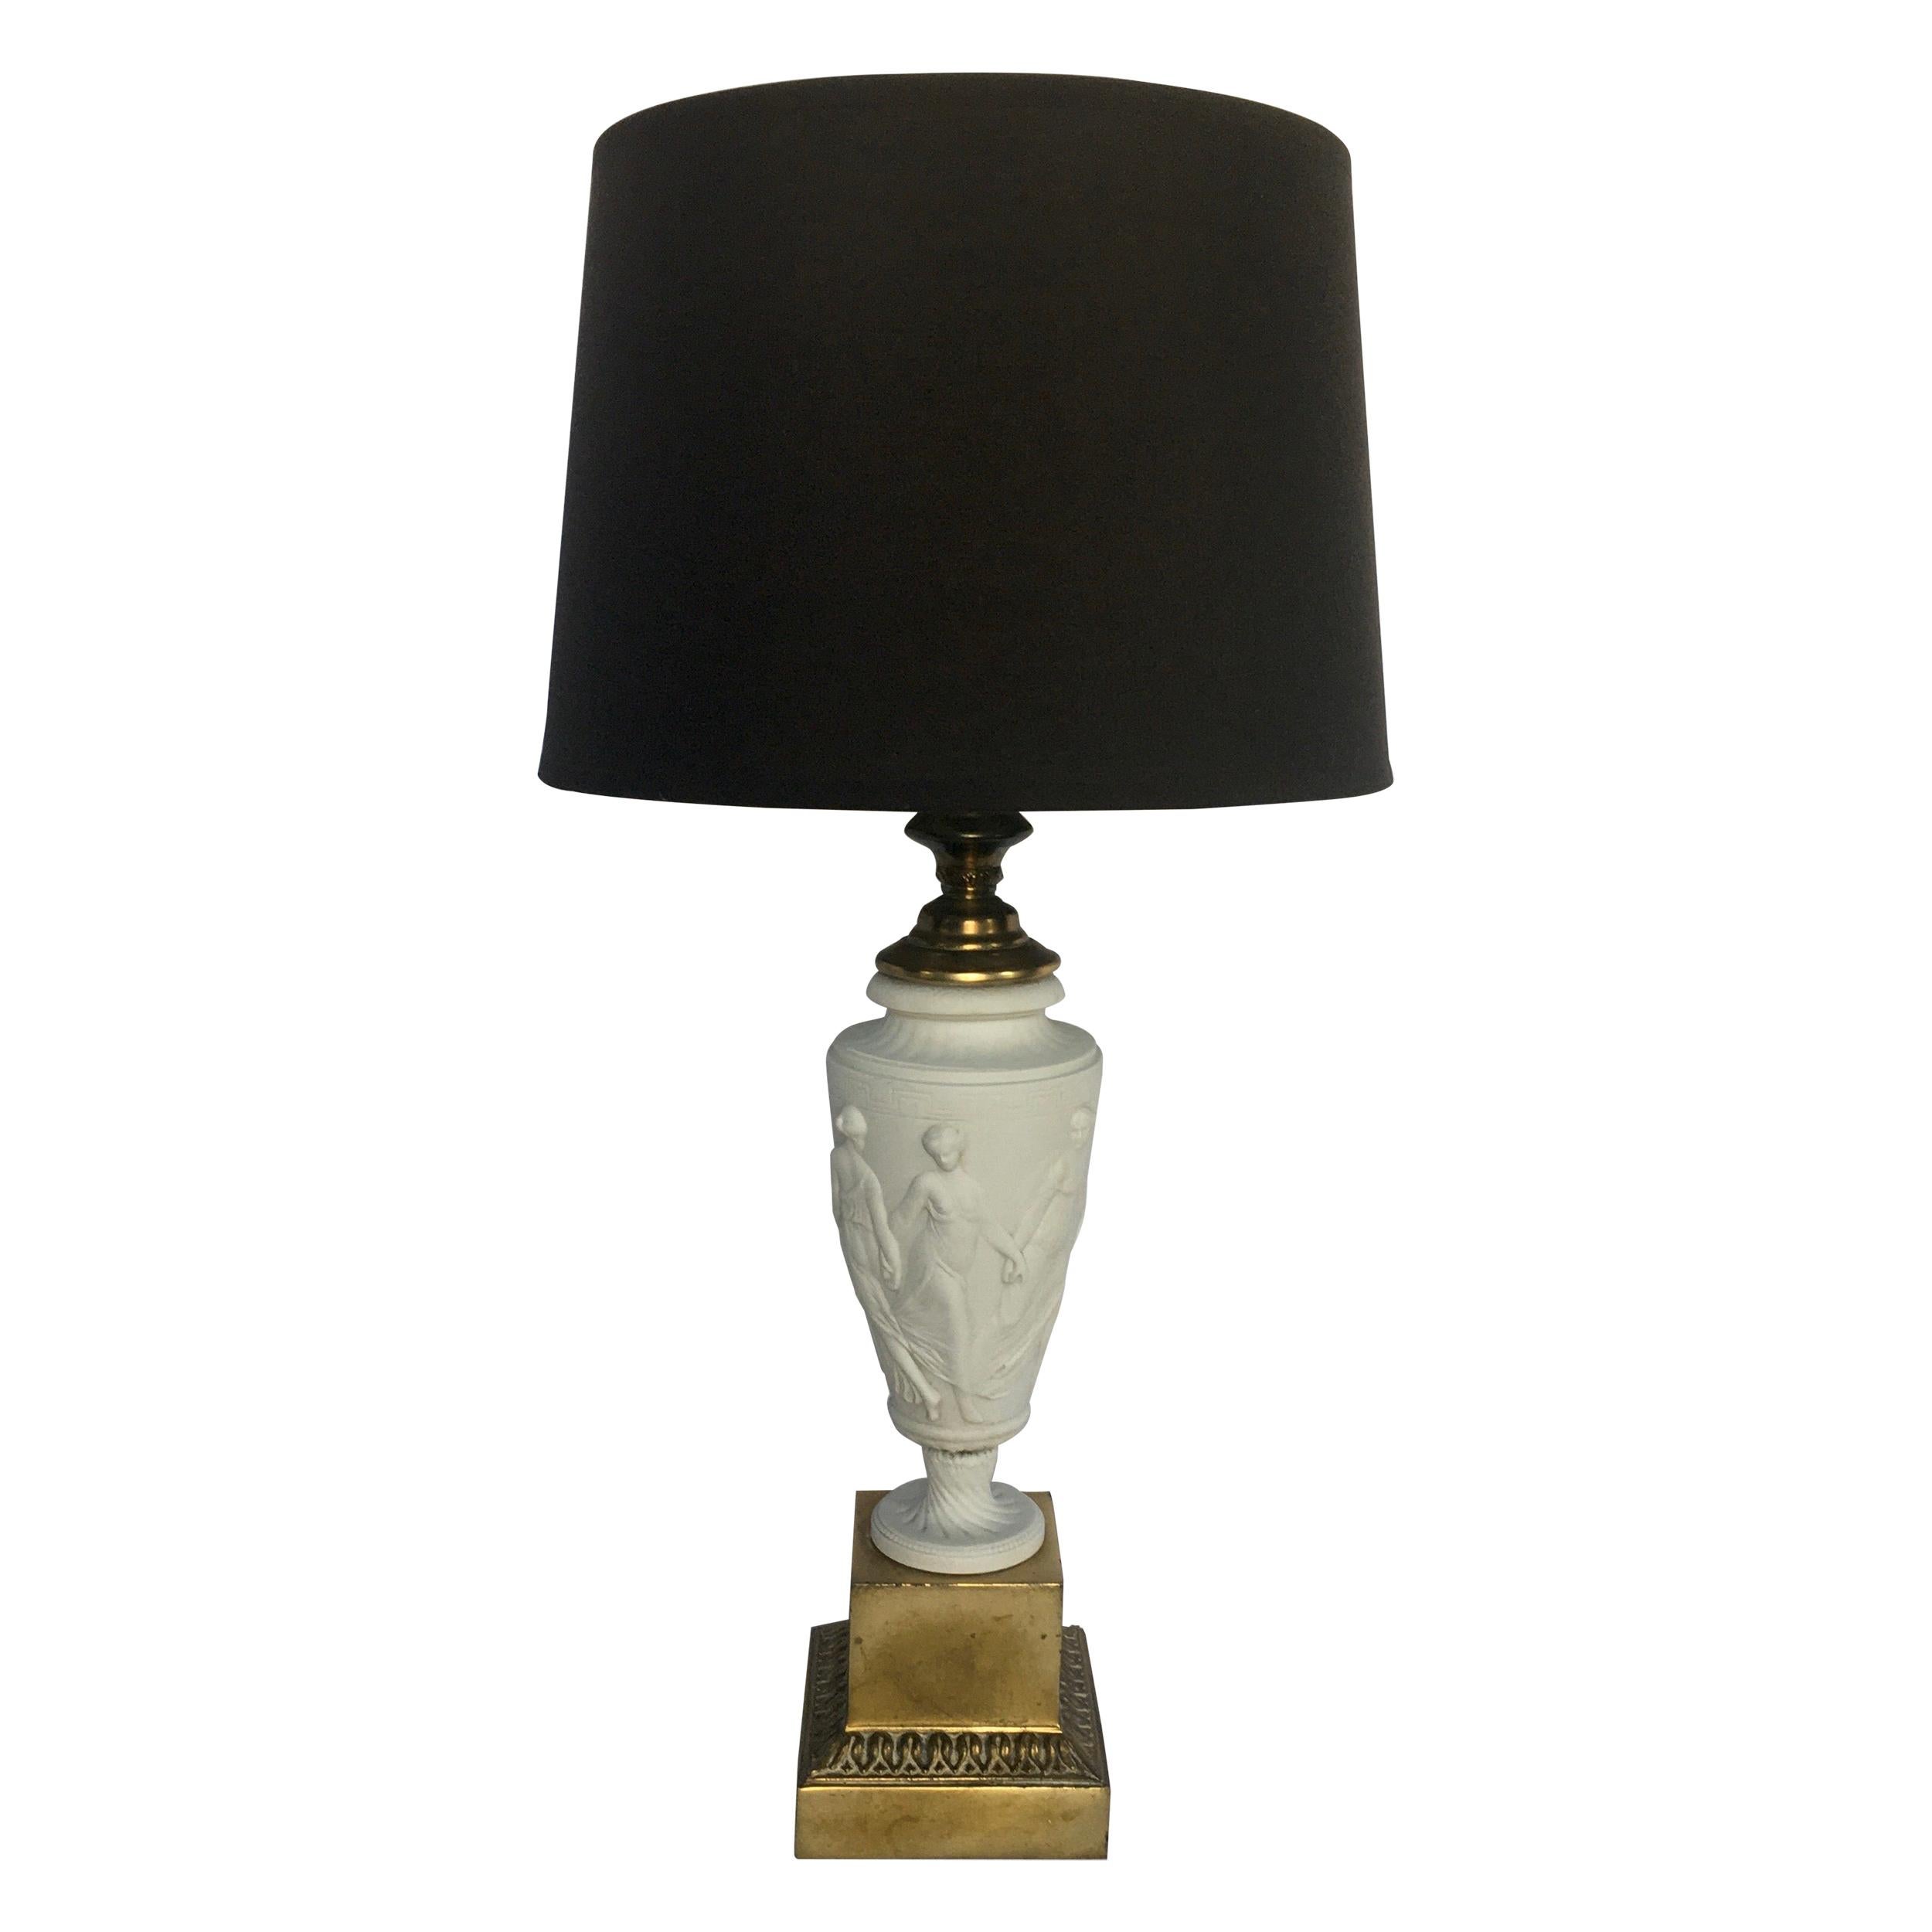 26"European Style Vintage Bronzed Table Lamp for Bedroom Living Room 